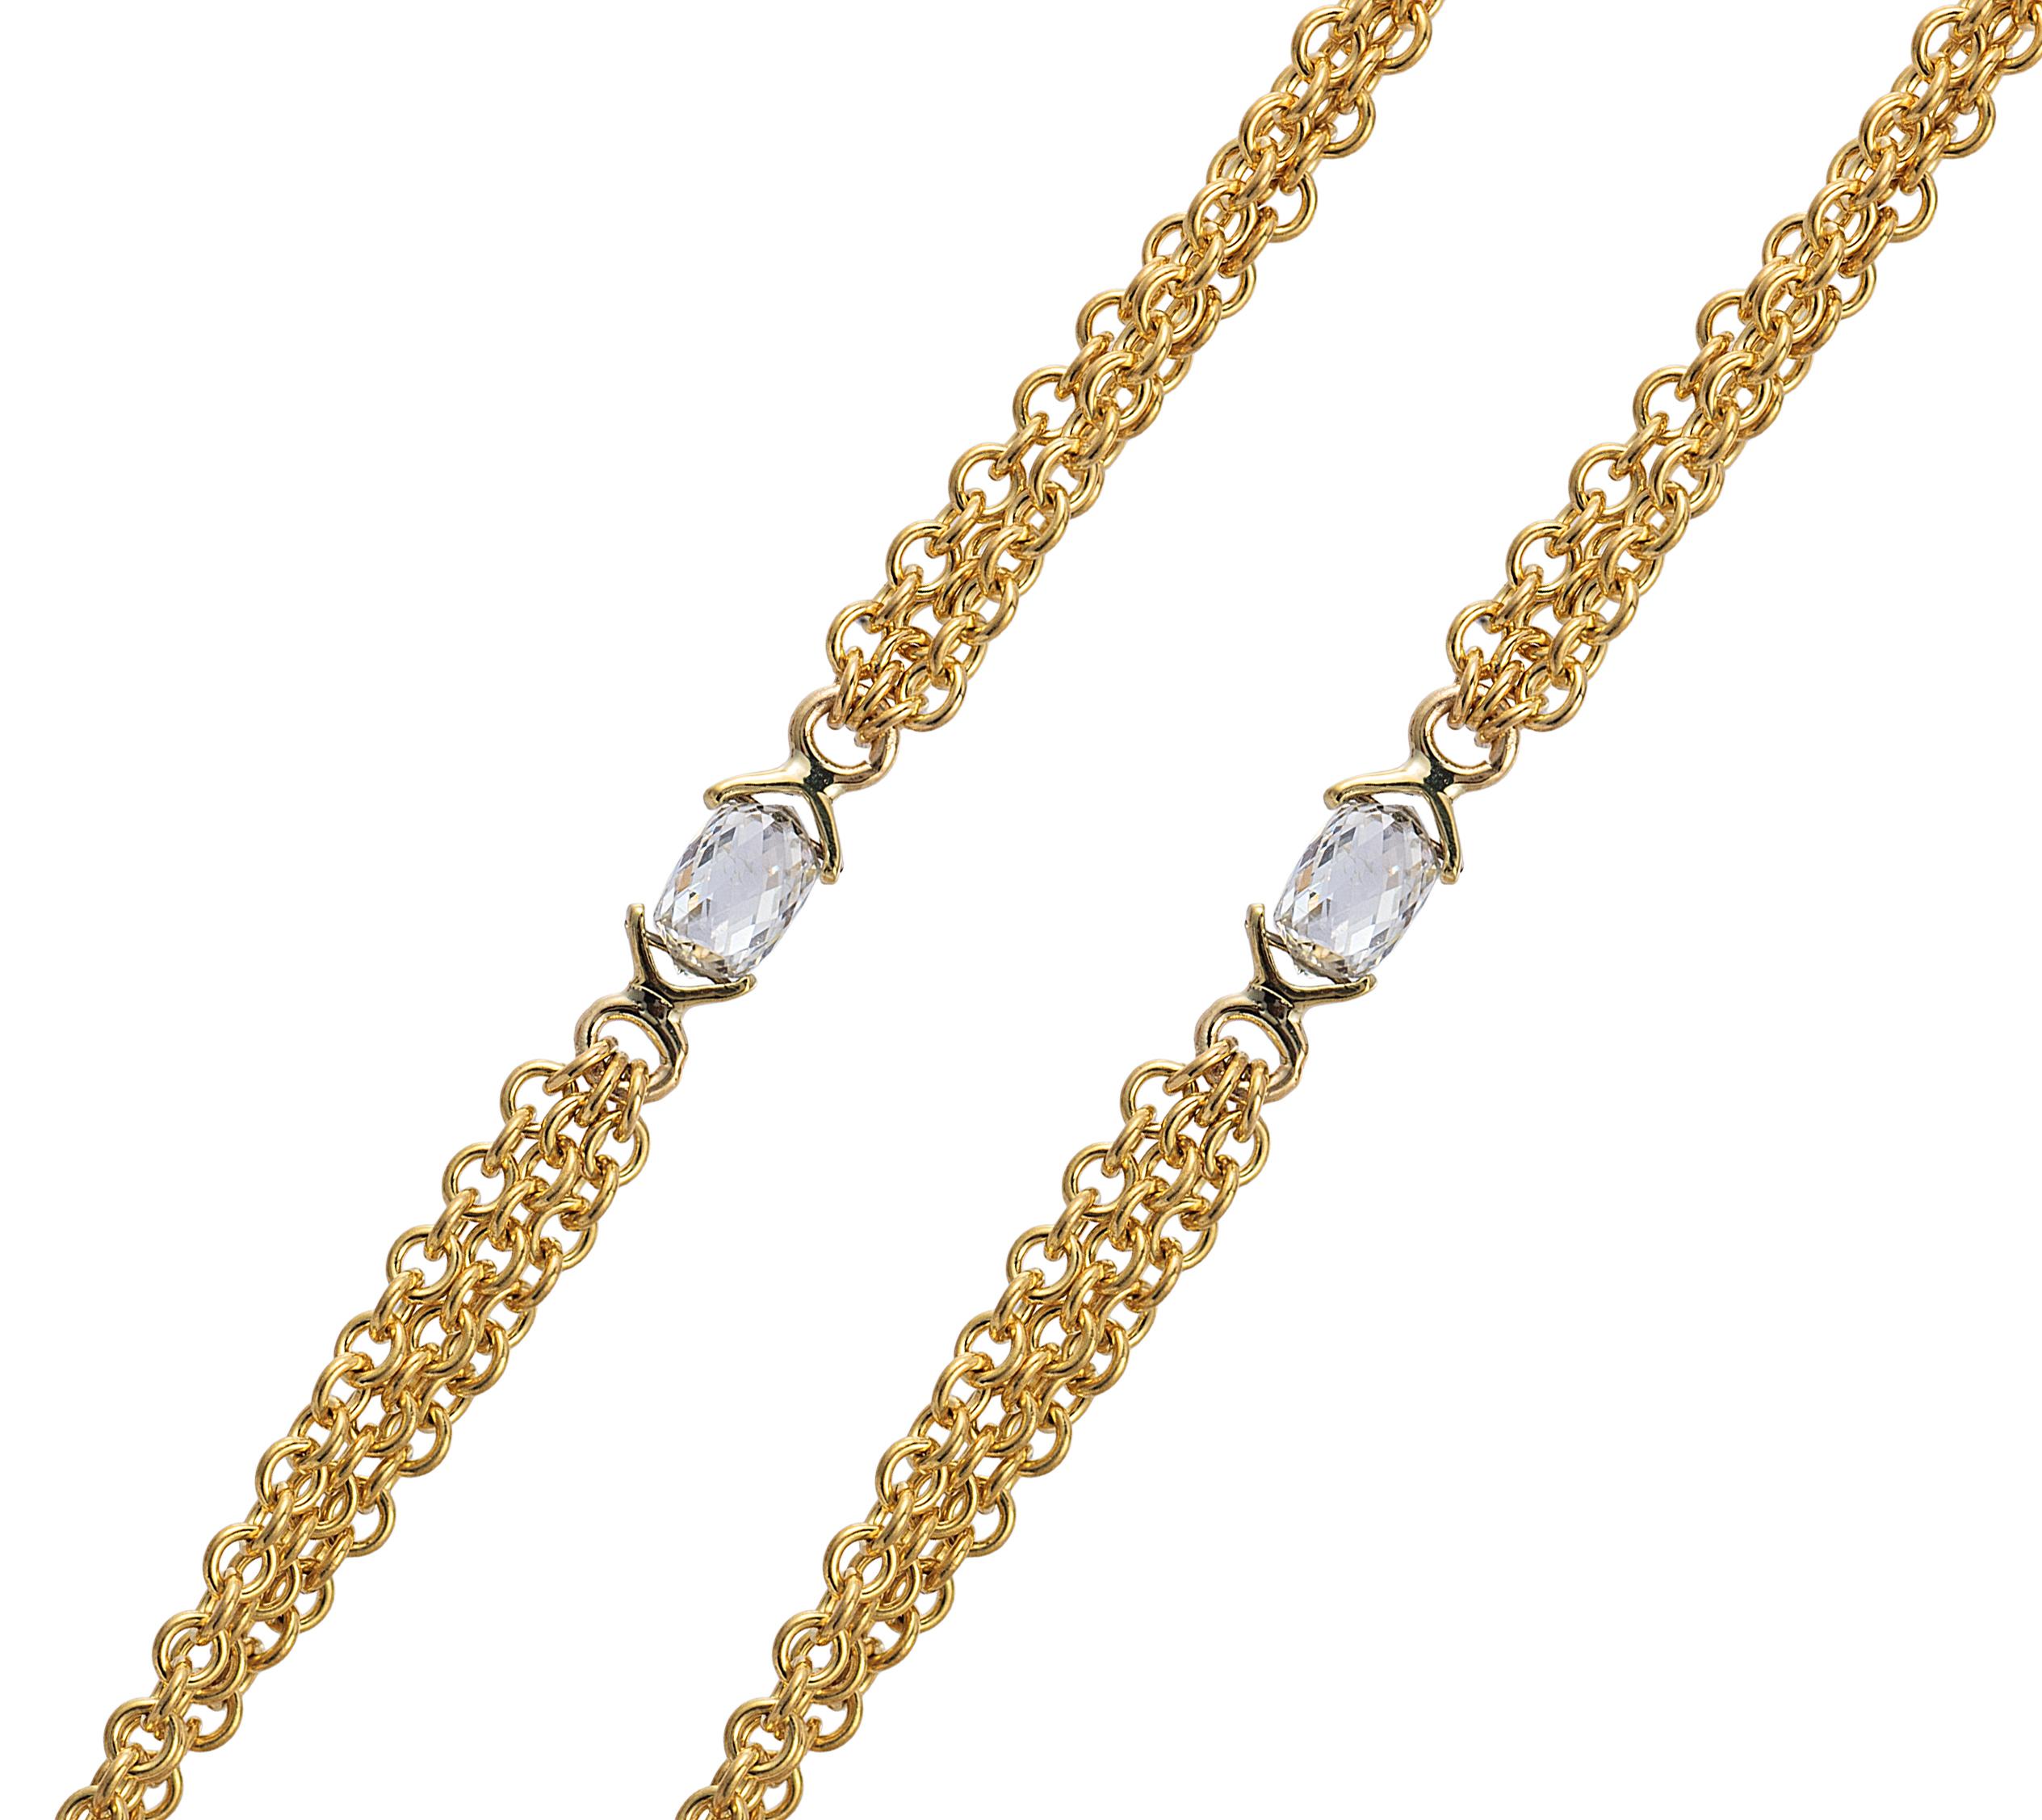 Hand made double sided Diamond Briolette Chain Necklace; in 18K Yellow Gold.

Diamonds: G-H / VS, Approx. Wt: 3.9 Carats

(Pendant sold separately)